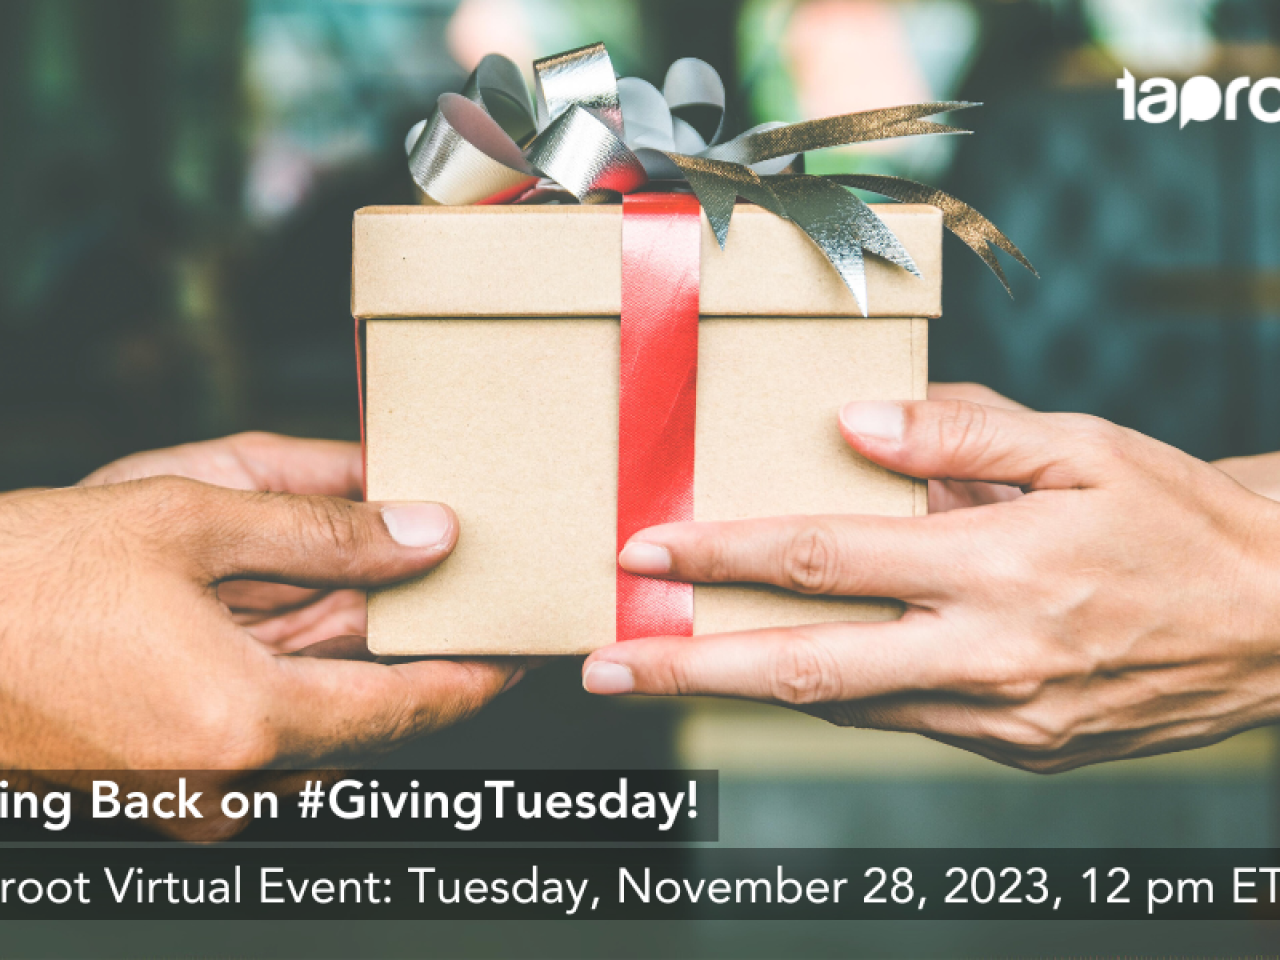 A brown gift box is passed from one set of hands to another. Overlay text promotes Taproot's #GivingTuesday volunteer event.